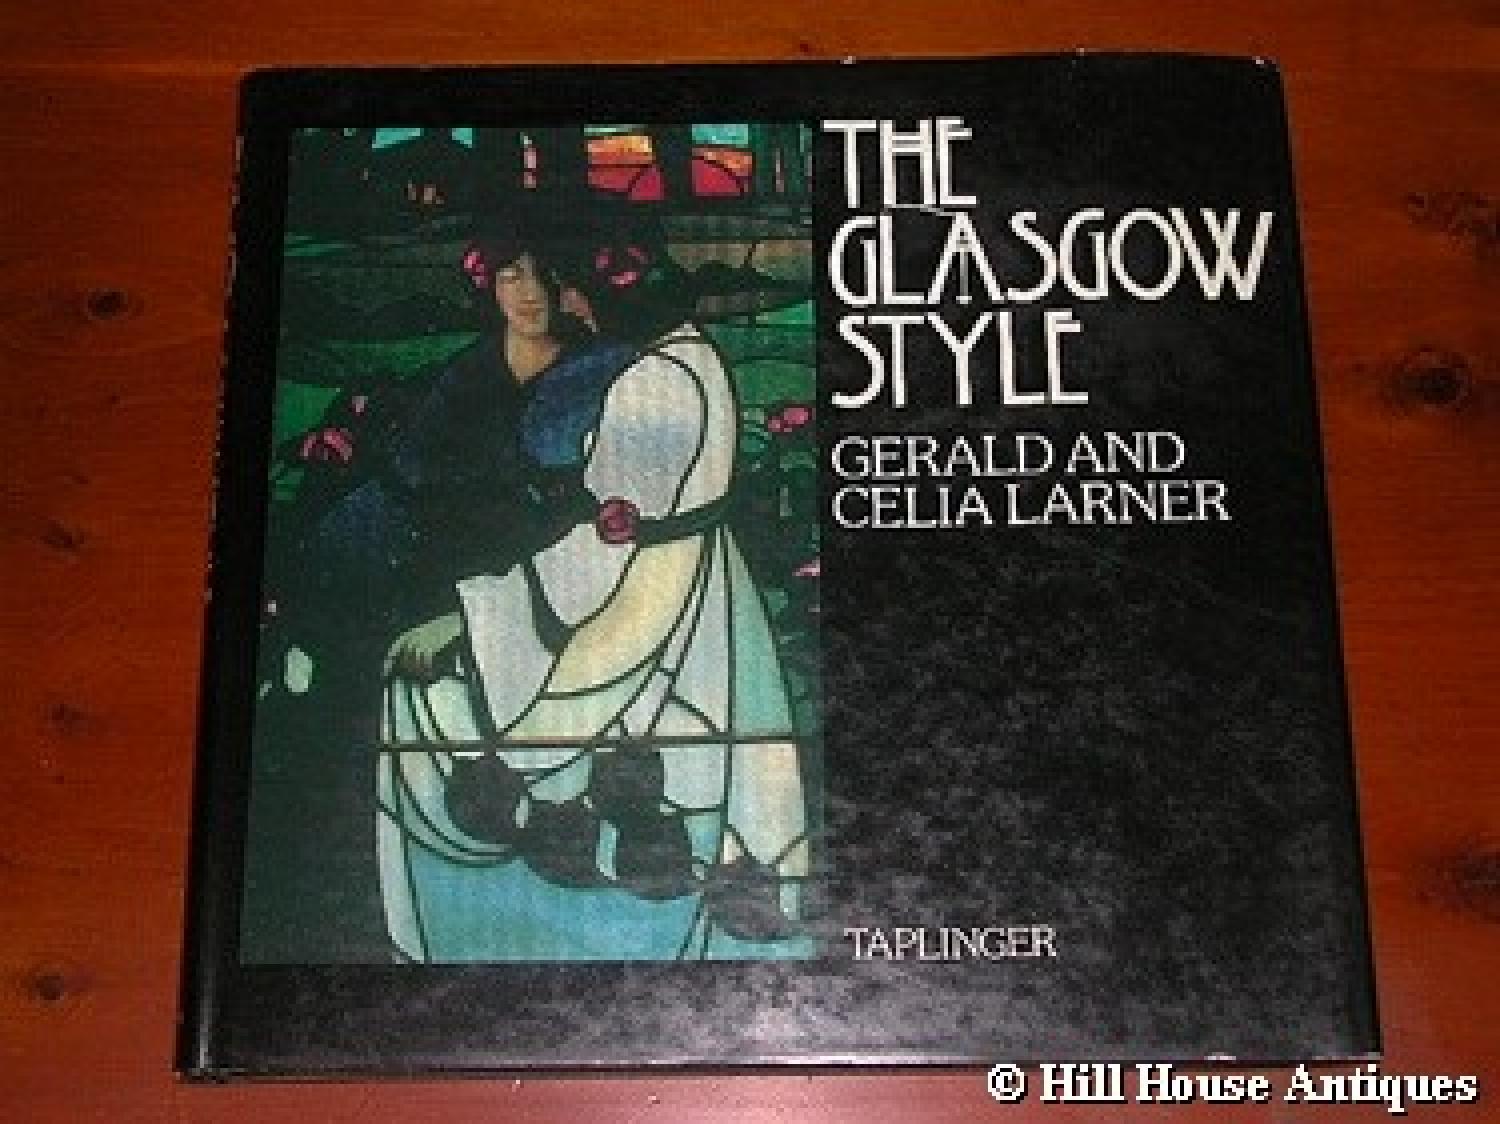 The Glasgow Style book